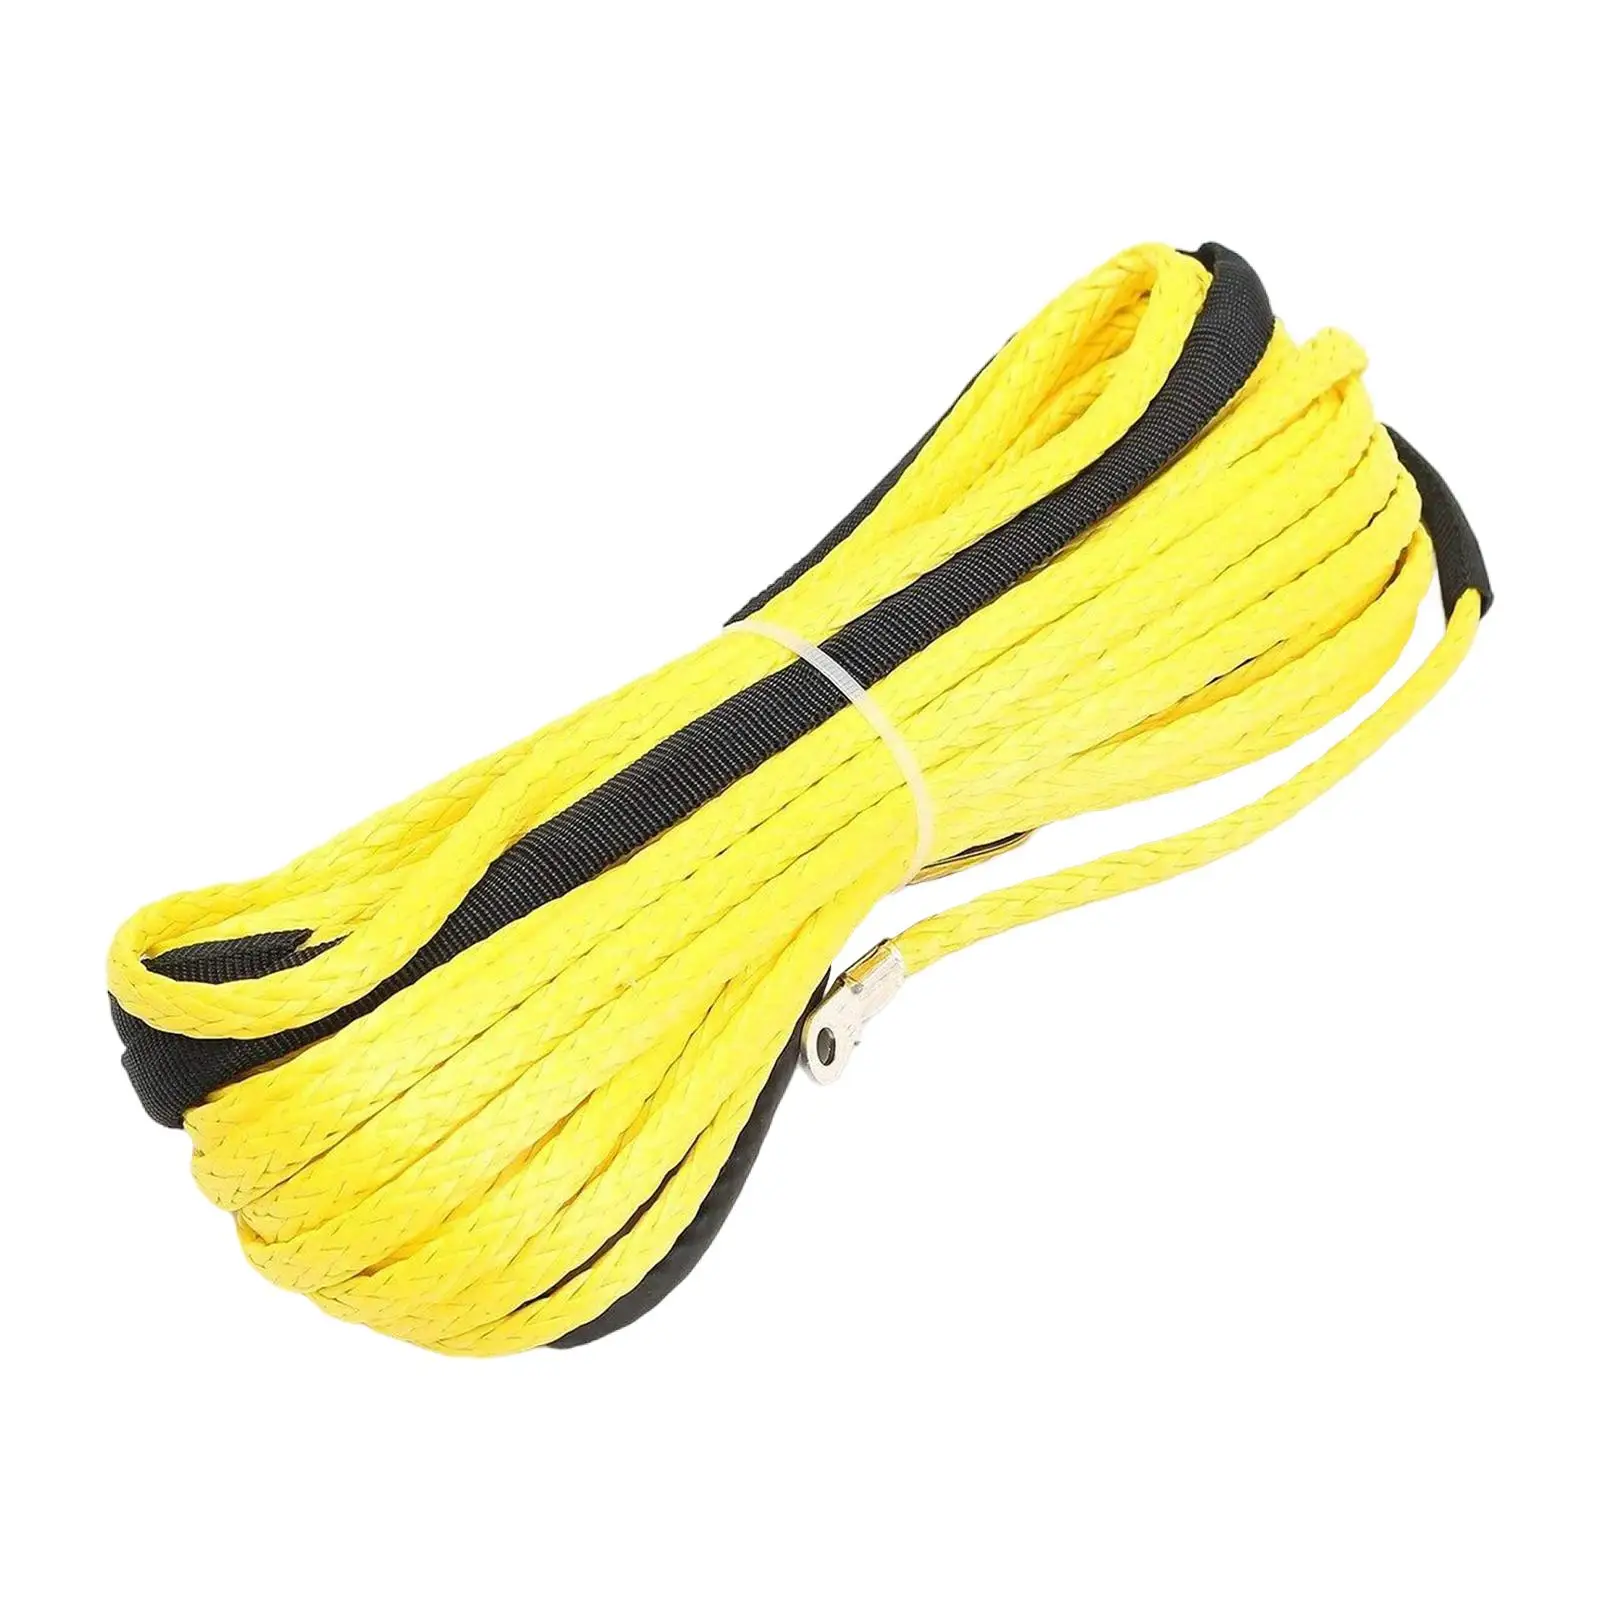 Synthetic Winch Rope 50` Heavy Duty Vehicles Towing Road Recovery Durable Car Breakdowns Towing Winch Cable SUV ATV Boat Truck